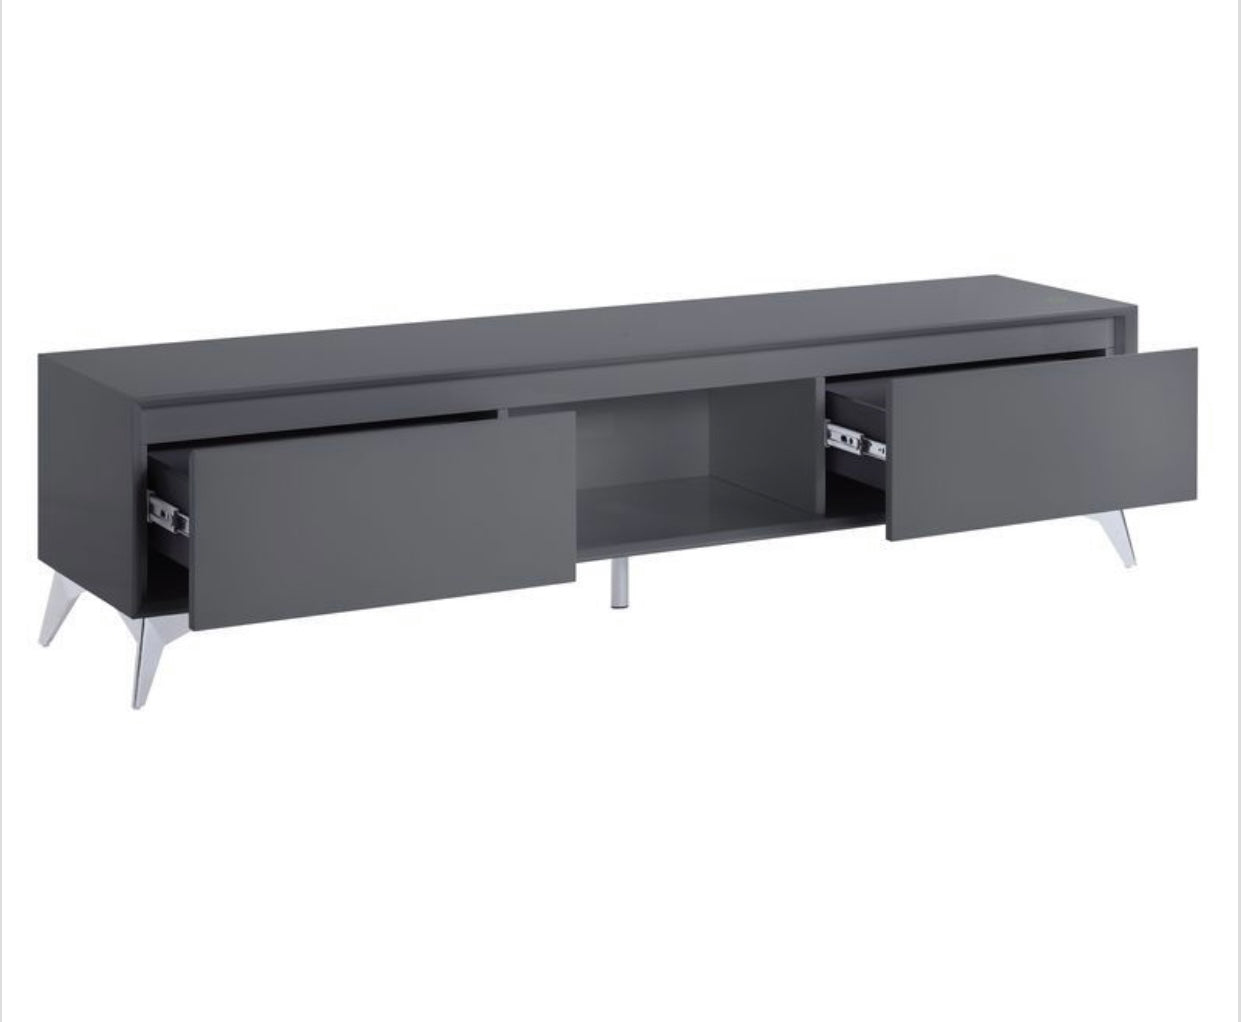 Raceloma TV Stand 71” 91996